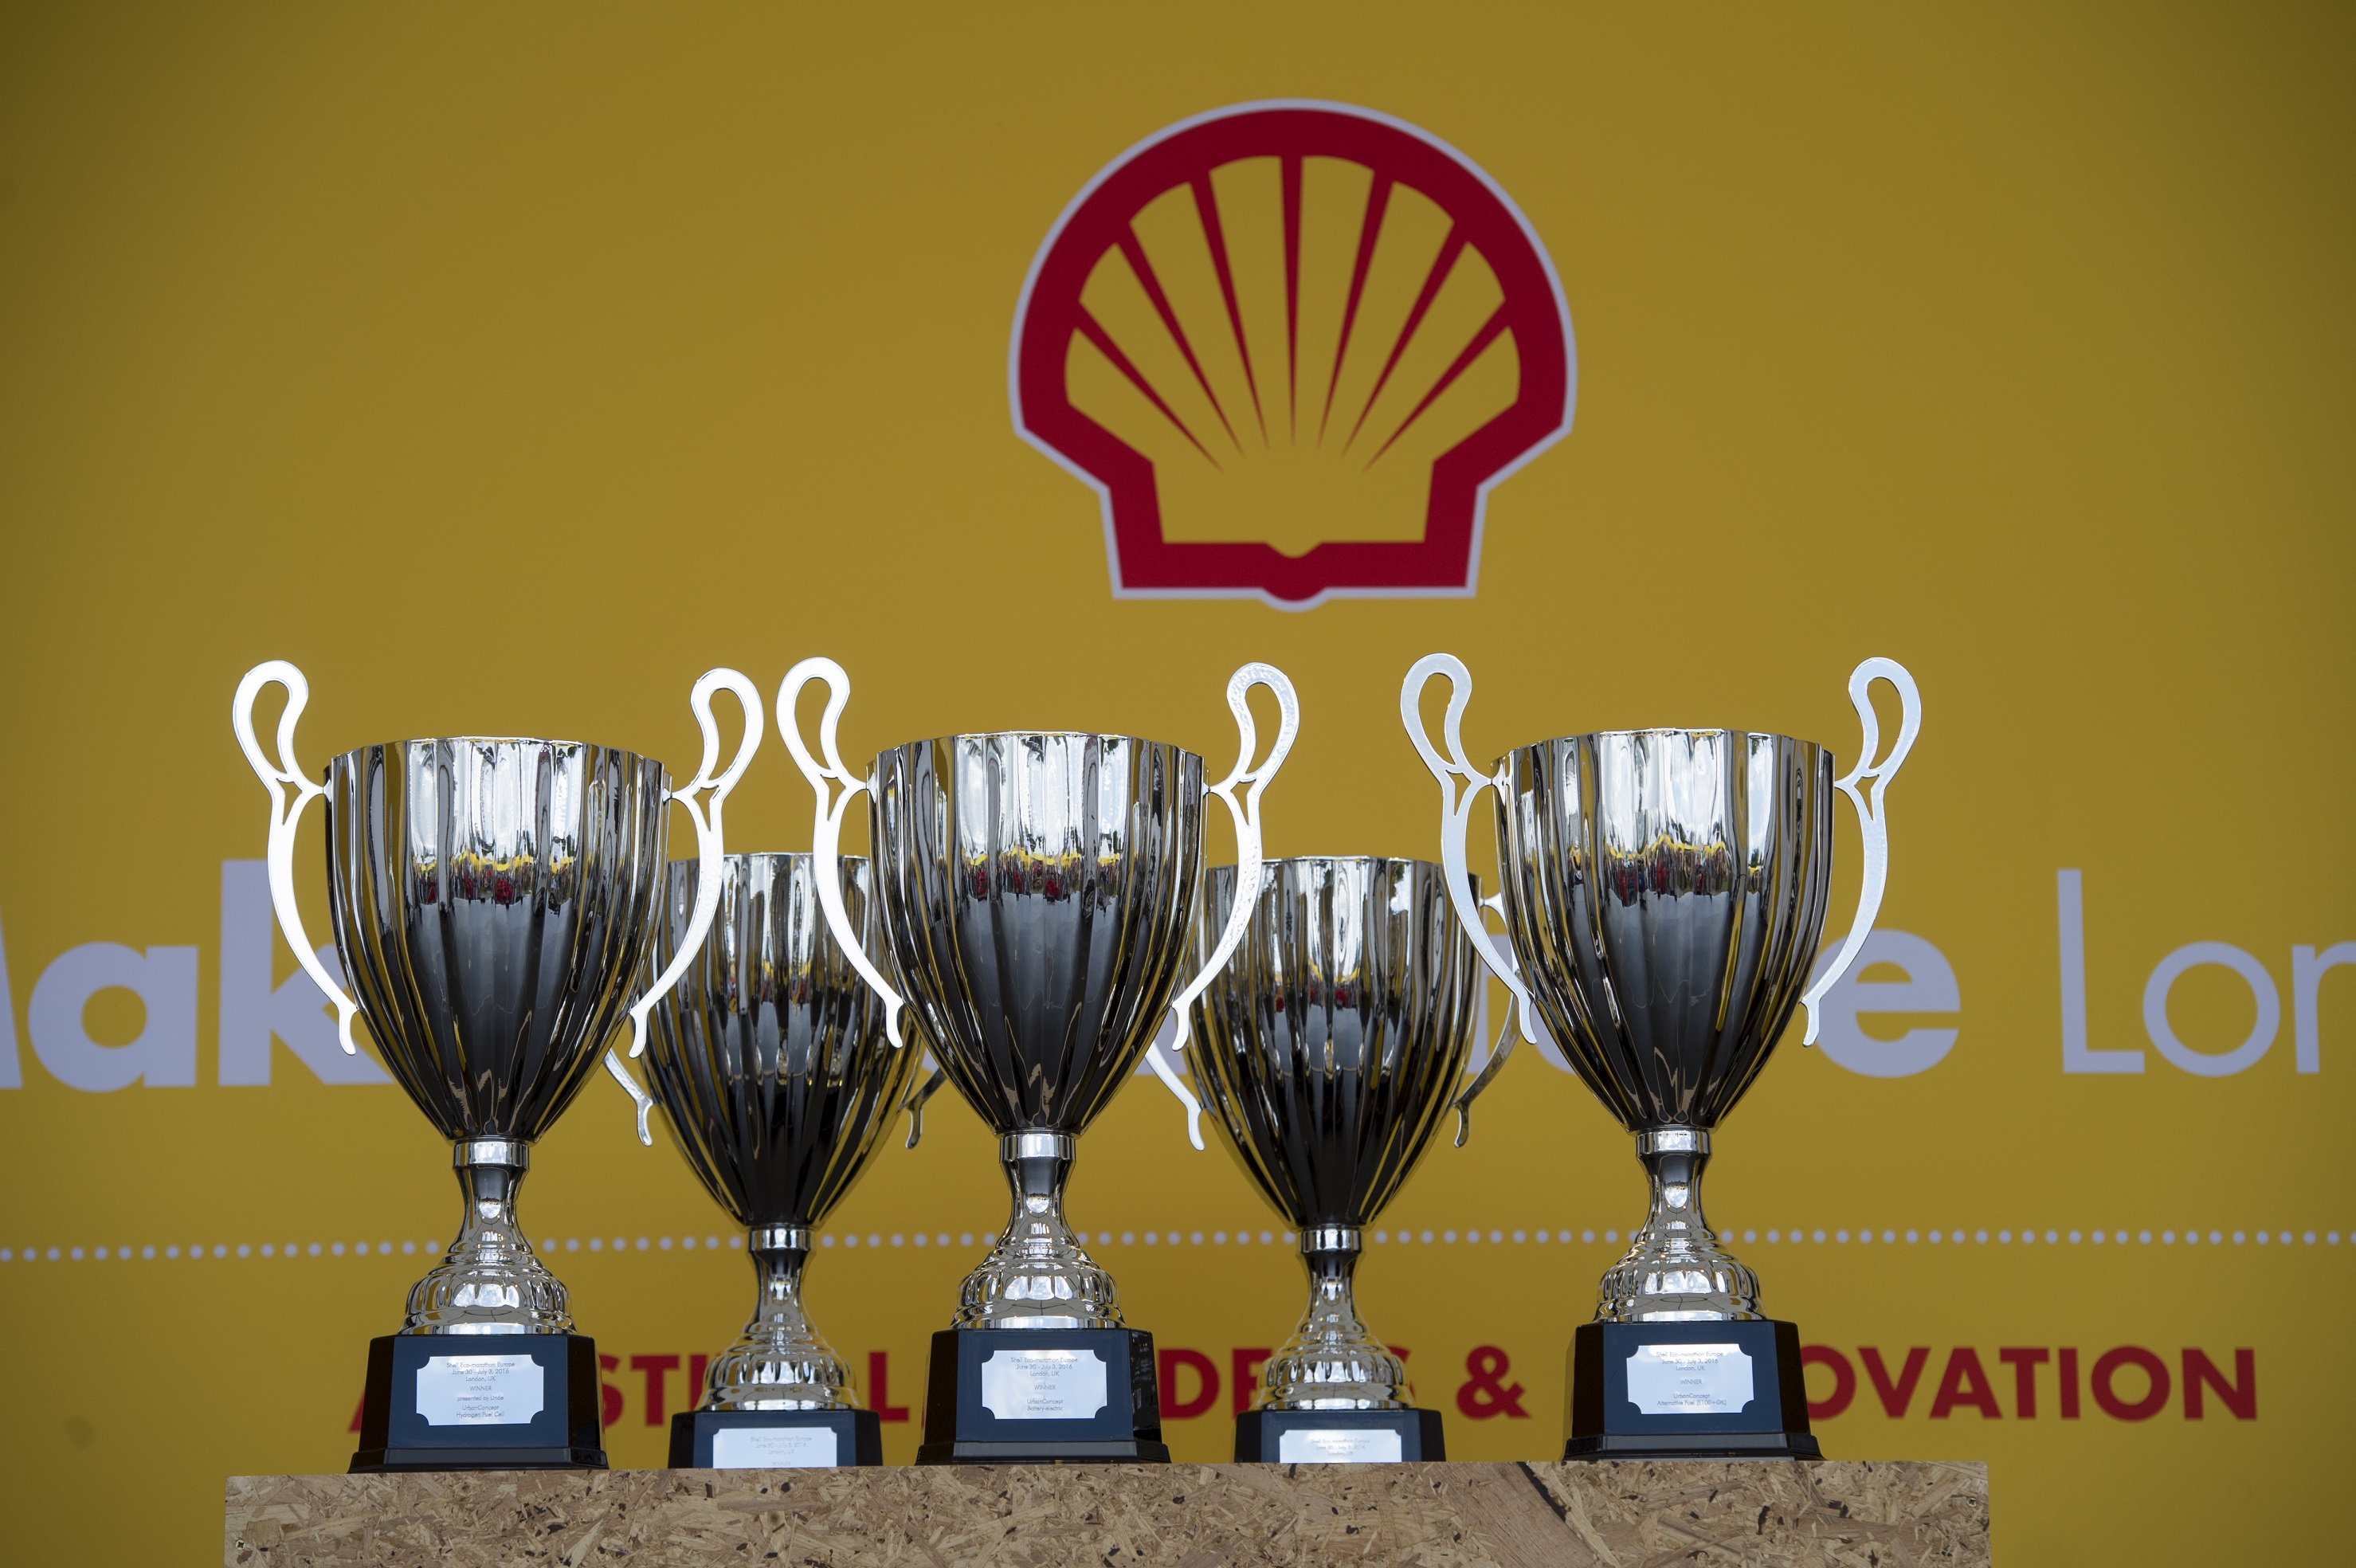 The 1st place prizes are lined up on stage during Make the Future London 2016 at the Queen Elizabeth Olympic Park, Saturday, July 2, 2016 in London, UK. (Fiona Hanson for Shell)